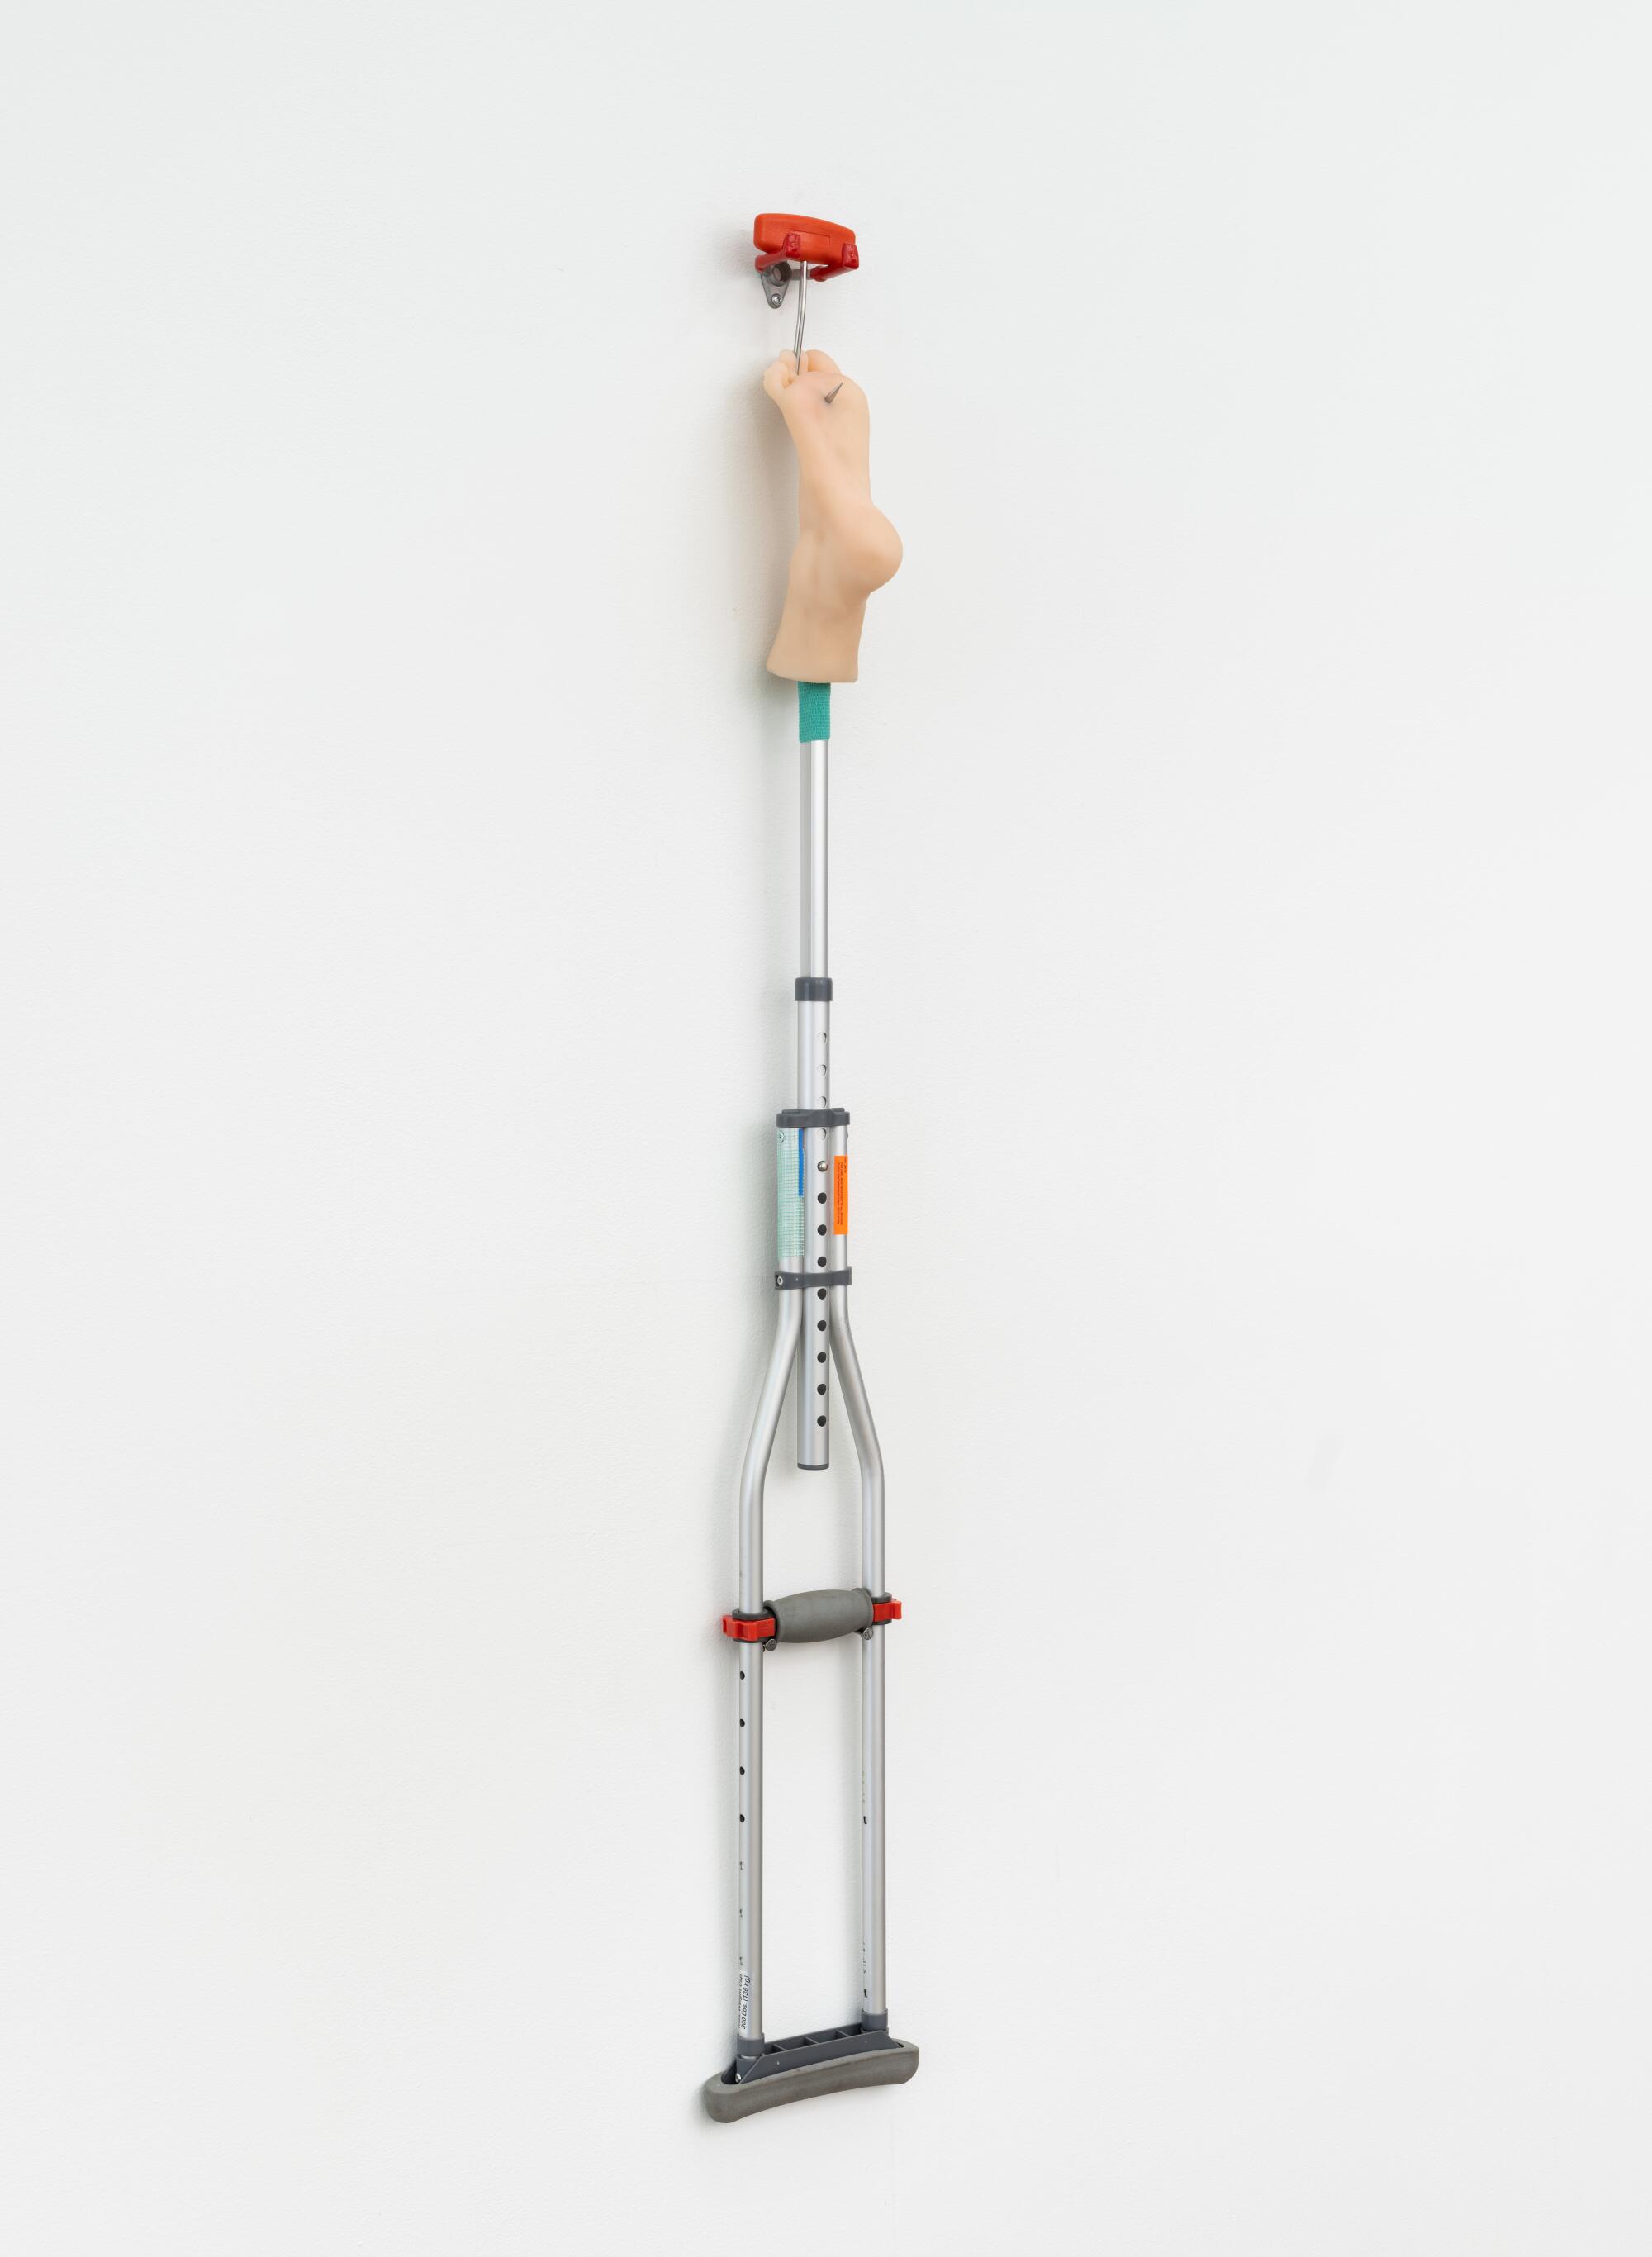 An artwork by Abareshi of a crutch on the wall with a plastic foot at the end.